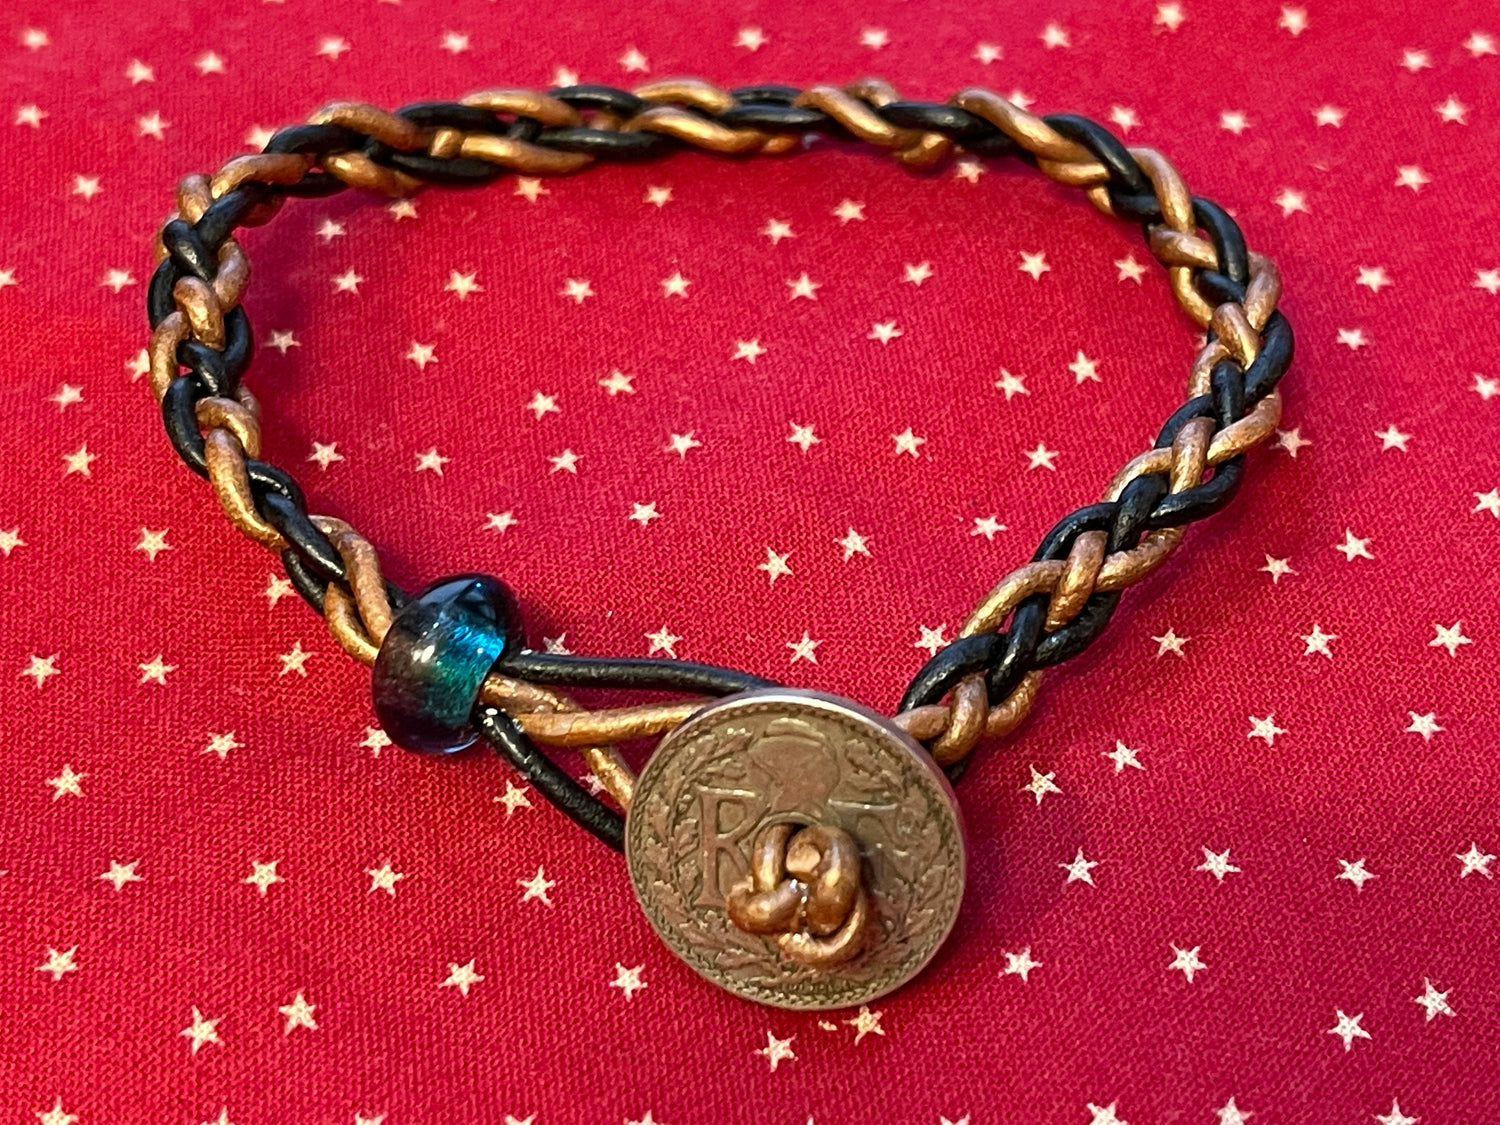 Fathers Day braided leather genuine world coin charm (ten centime French coin) bracelet Czech glass